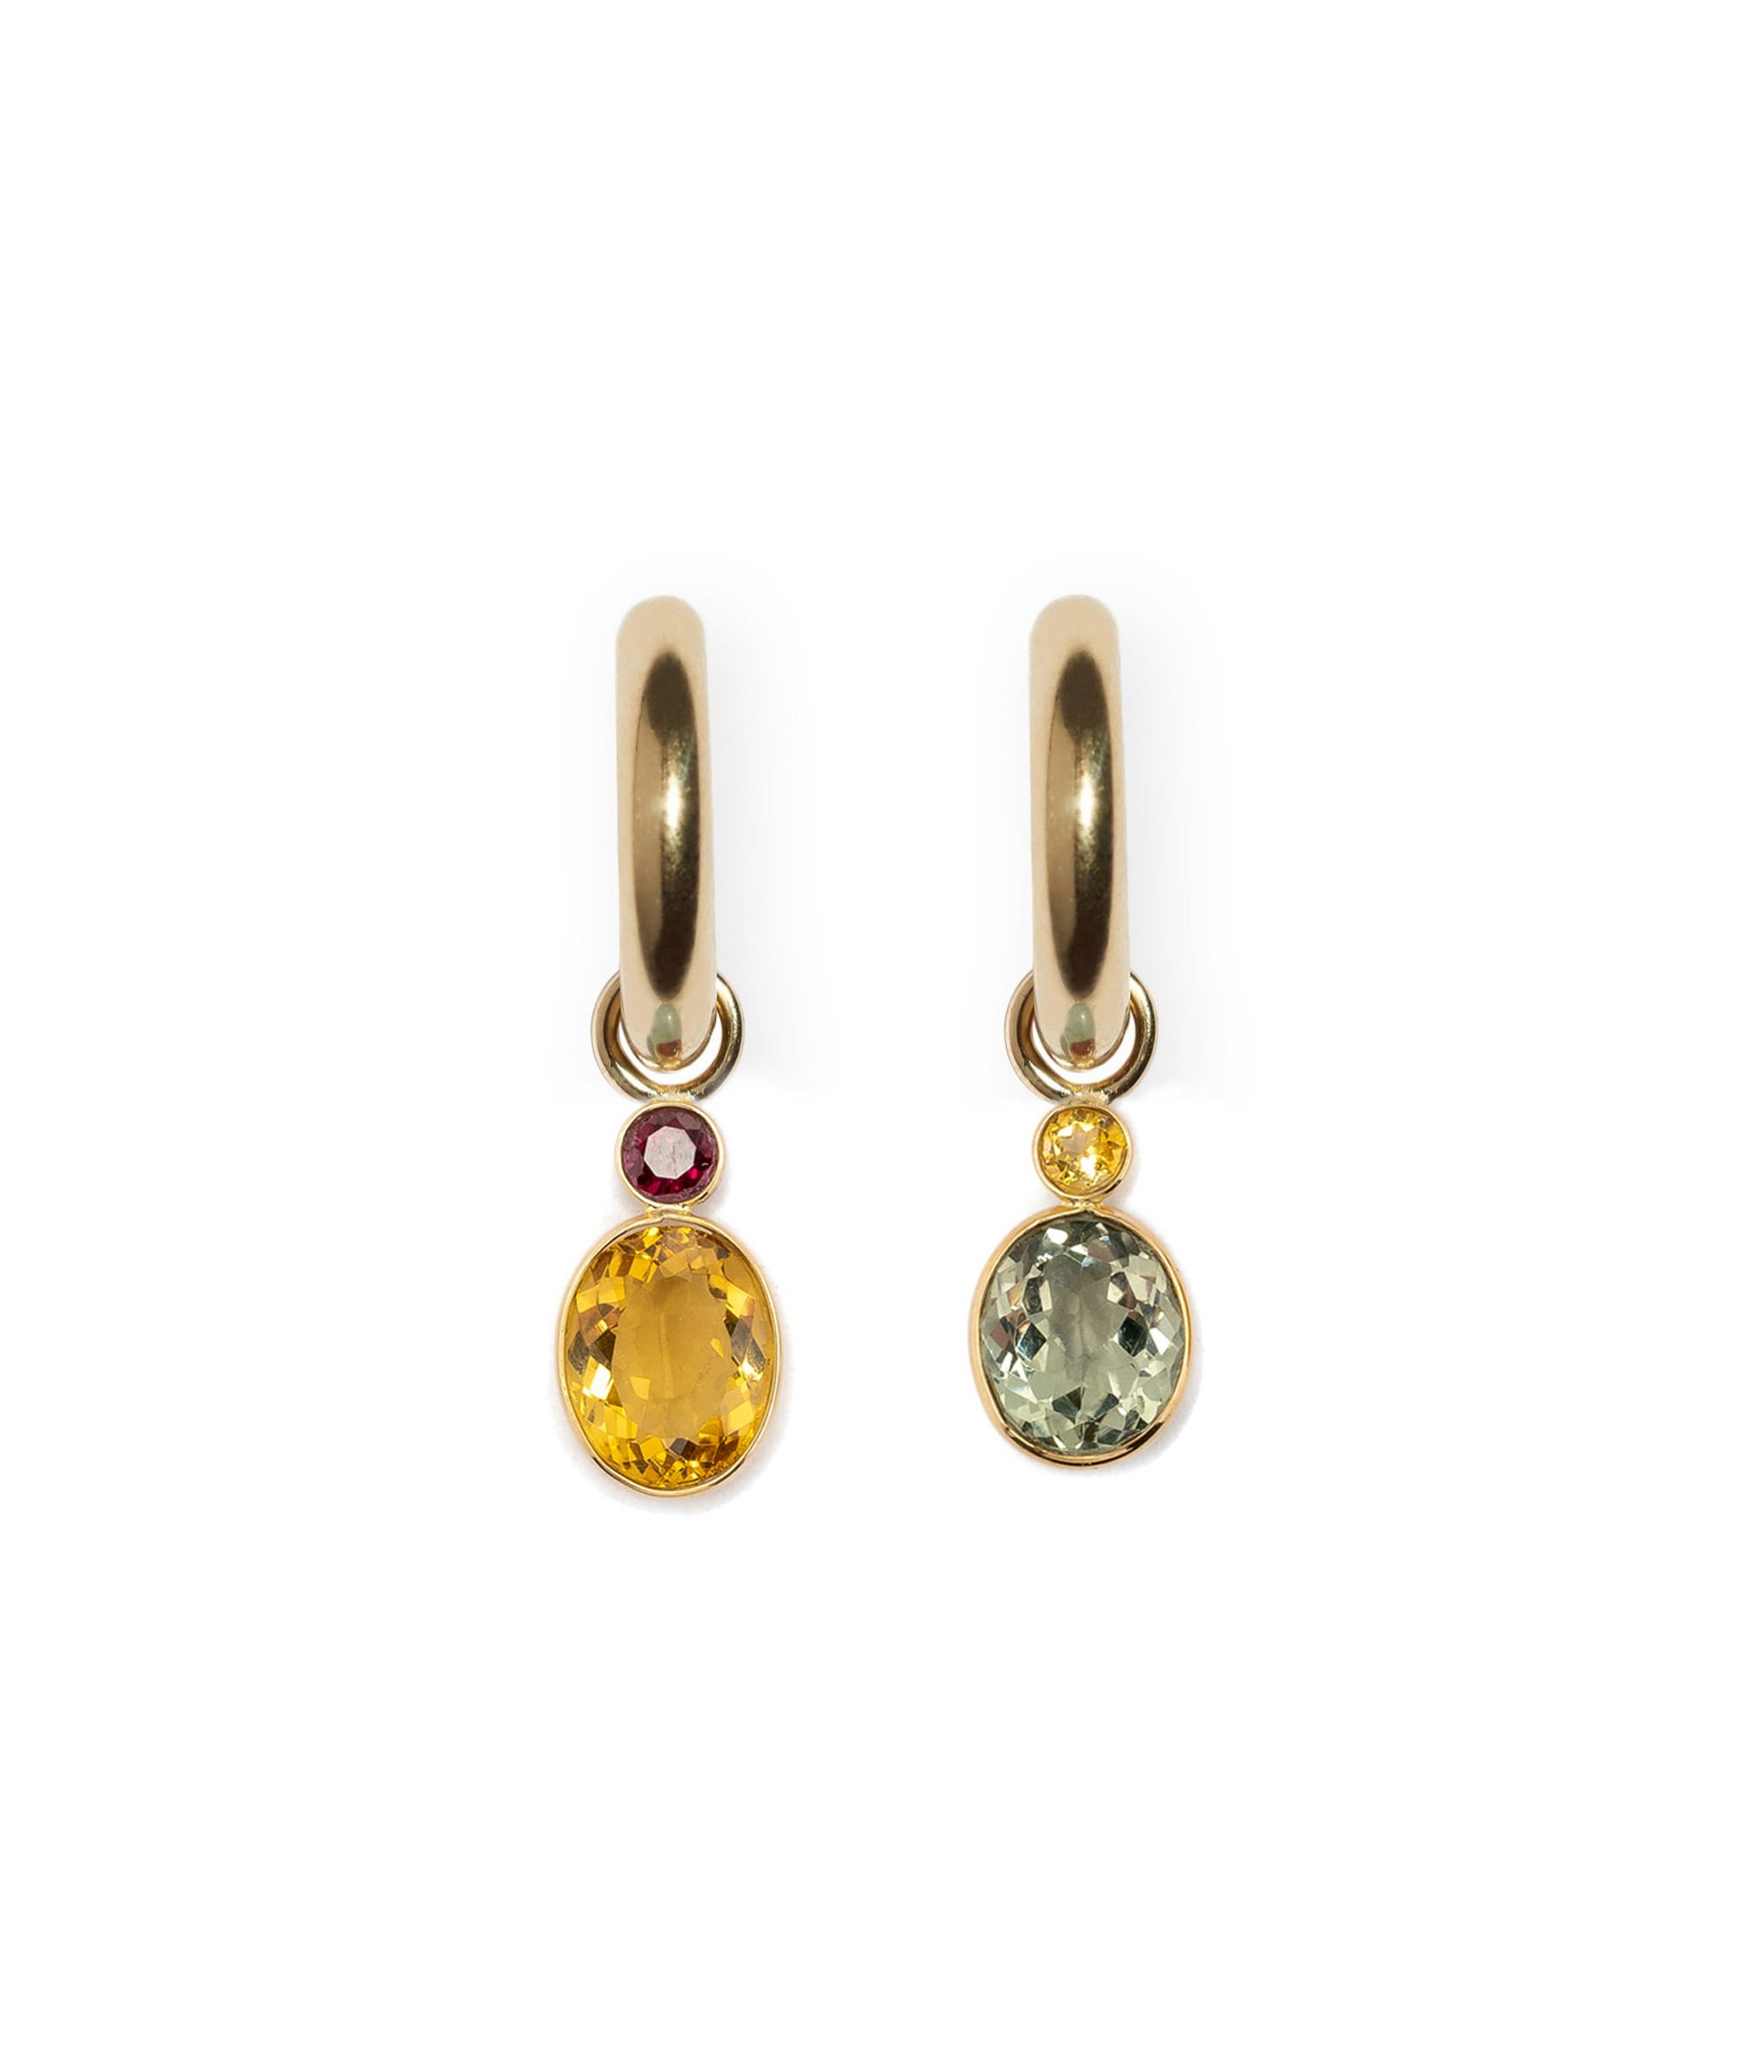 Fine Gold Mood Hoops with Garnet and Citrine Oval 14k Earring Charm and other semiprecious charm.